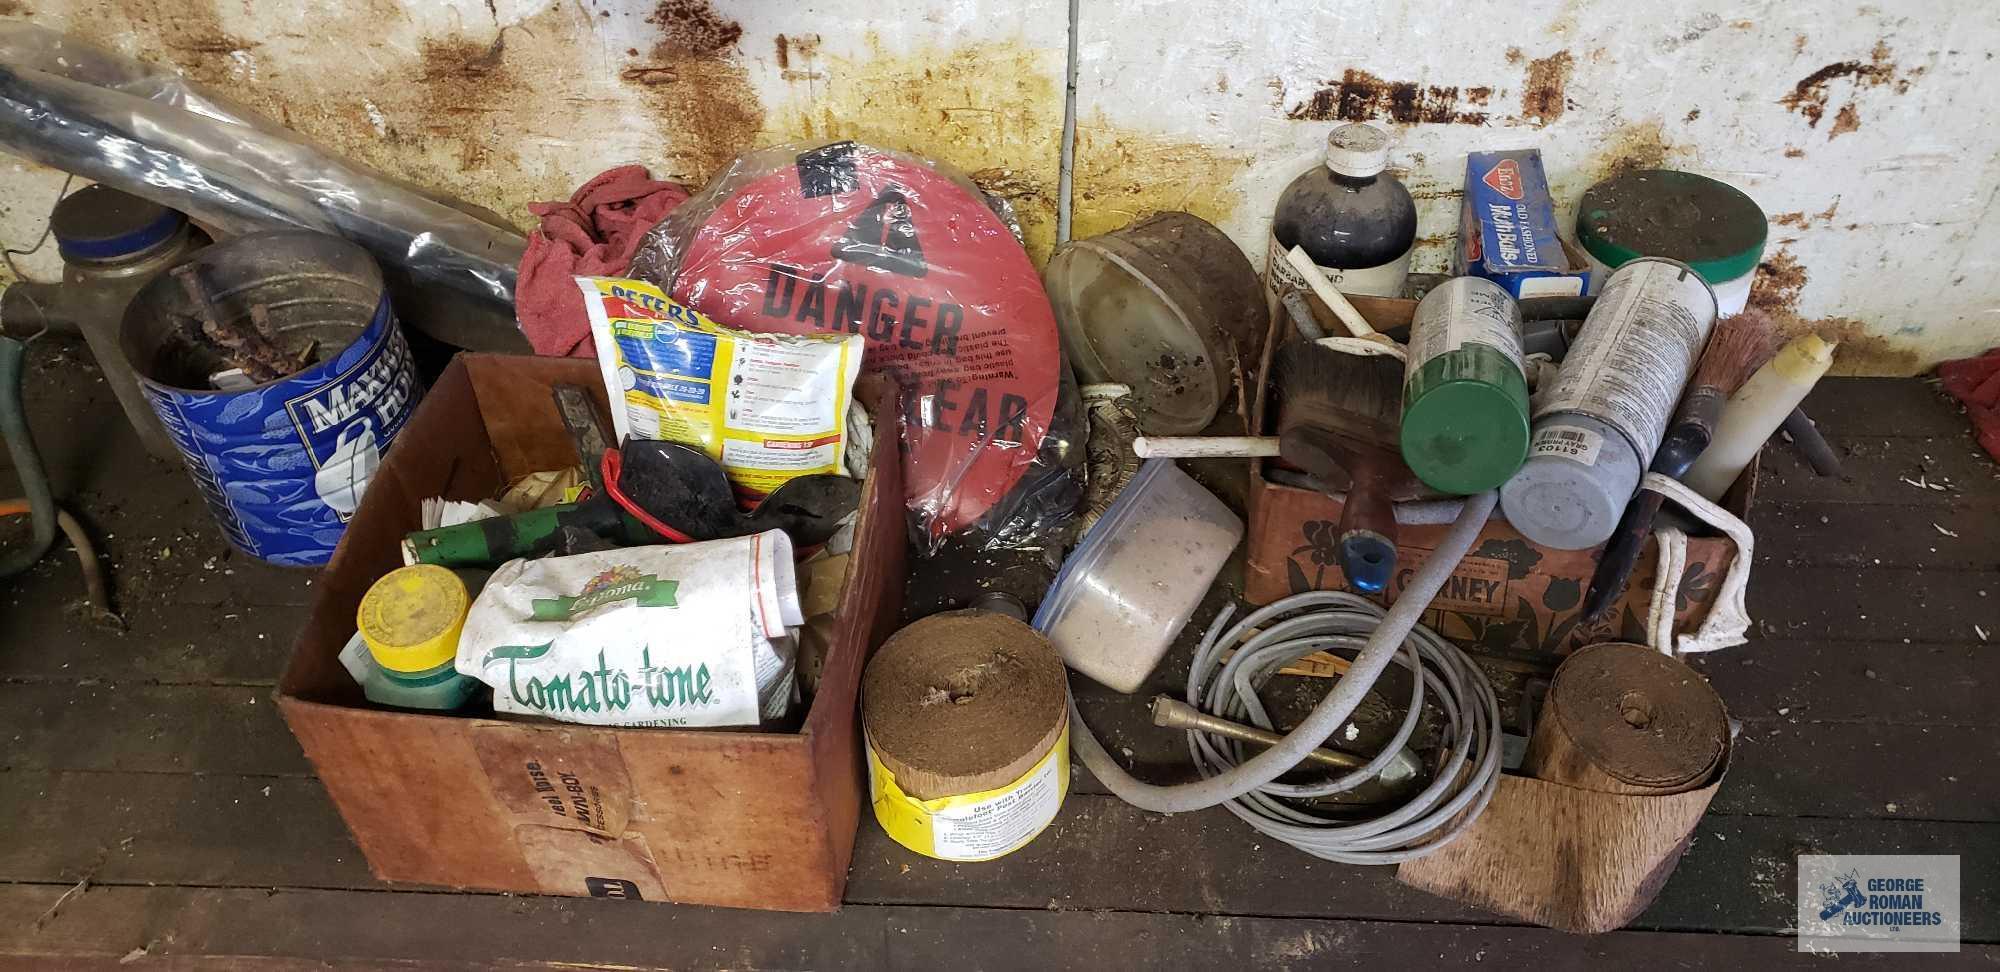 Lot of wire, sprays, hardware, electric motor and etc on top and under bench